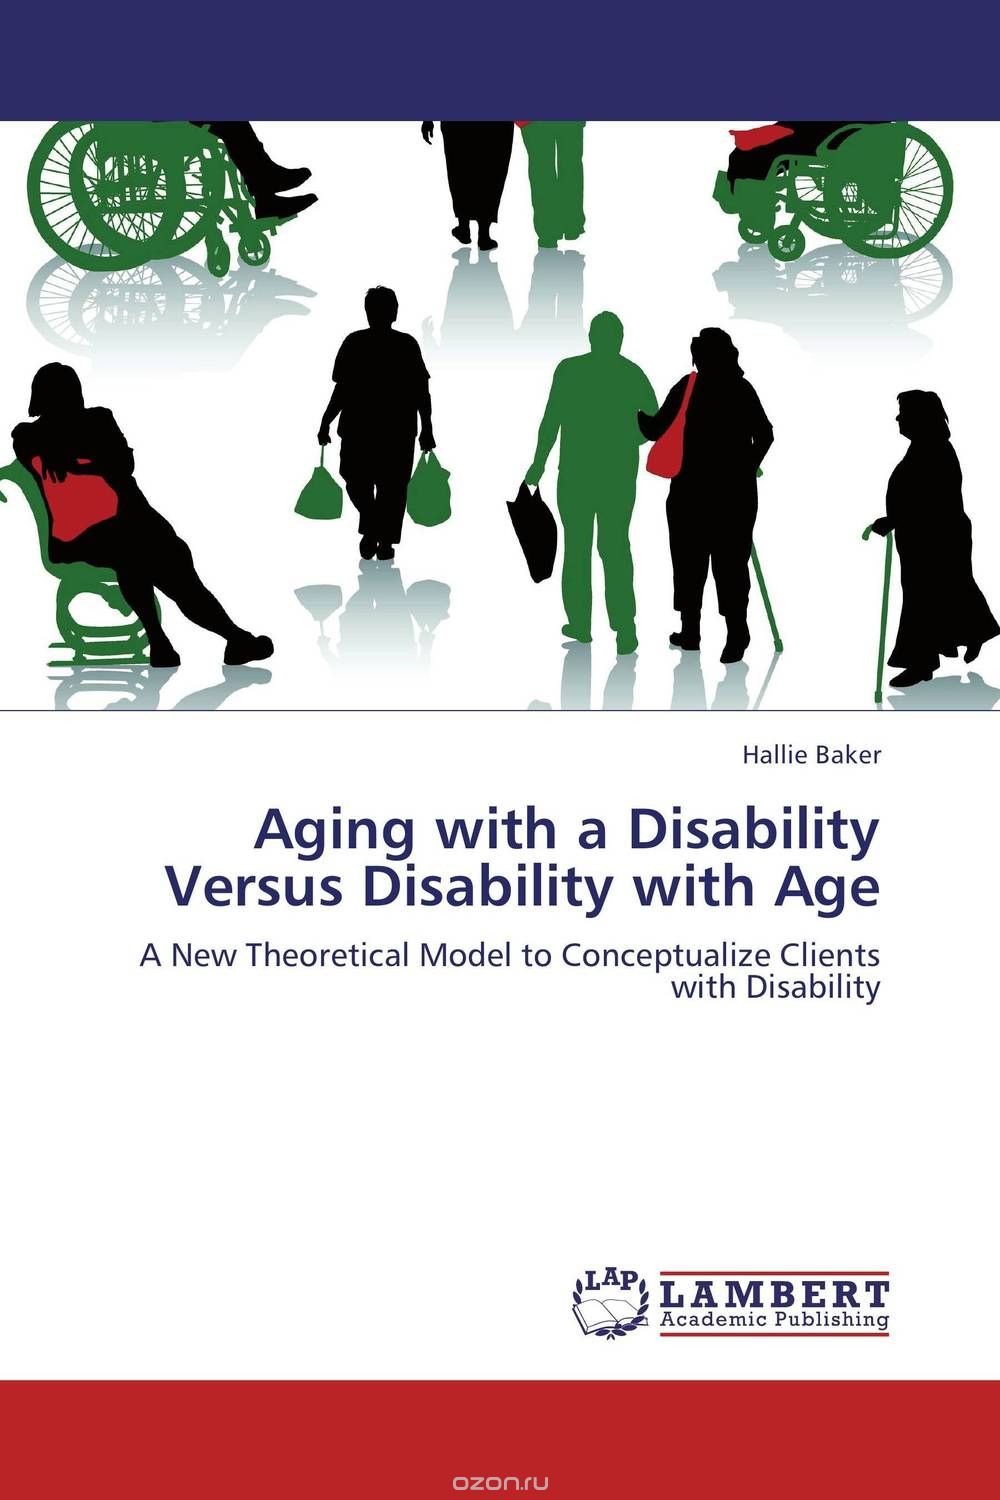 Скачать книгу "Aging with a Disability Versus Disability with Age"